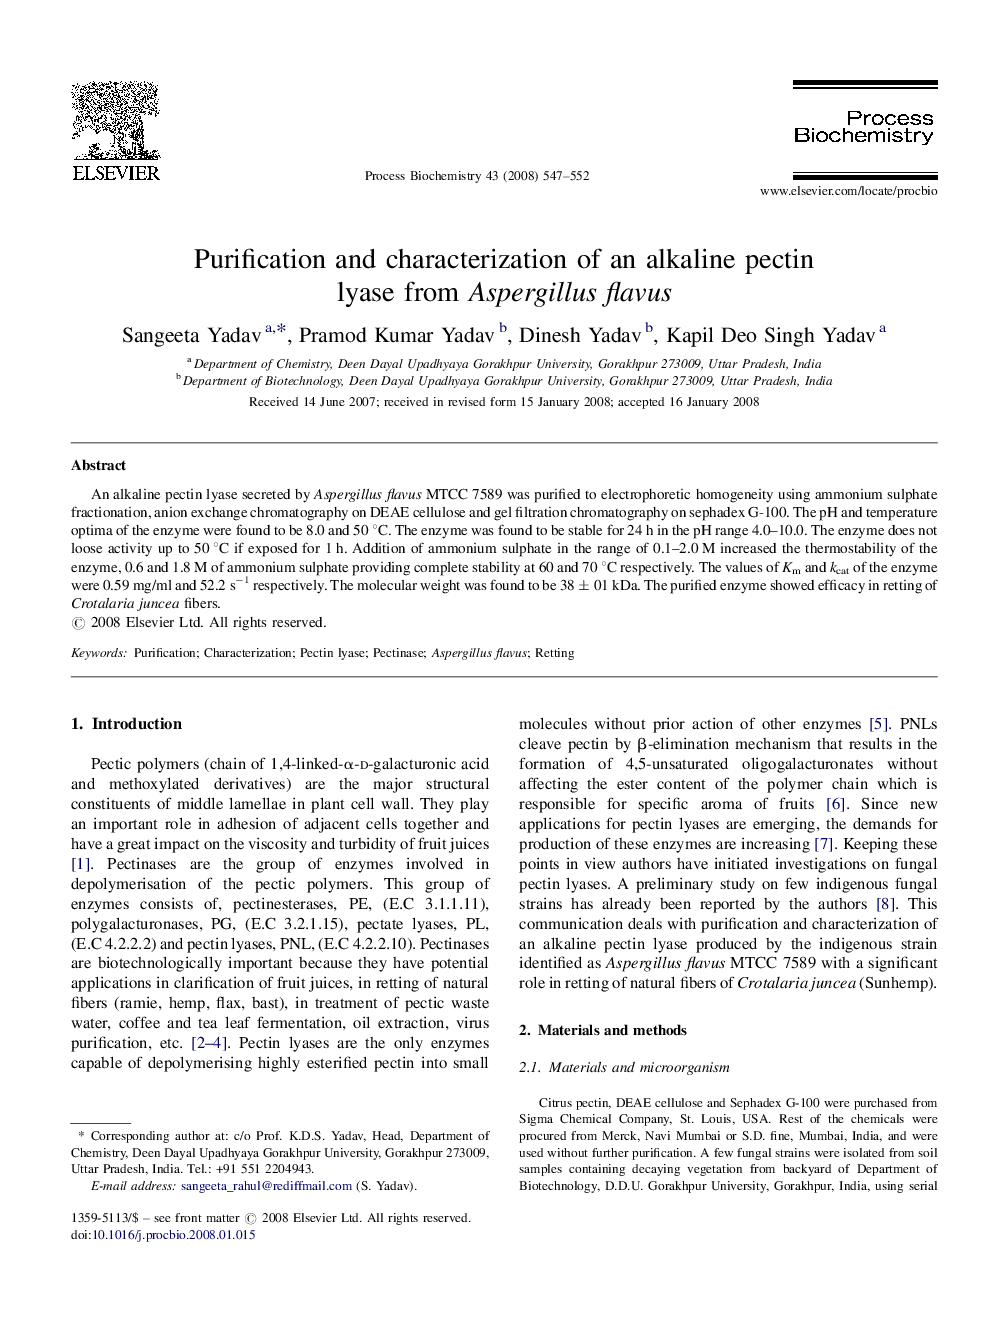 Purification and characterization of an alkaline pectin lyase from Aspergillus flavus